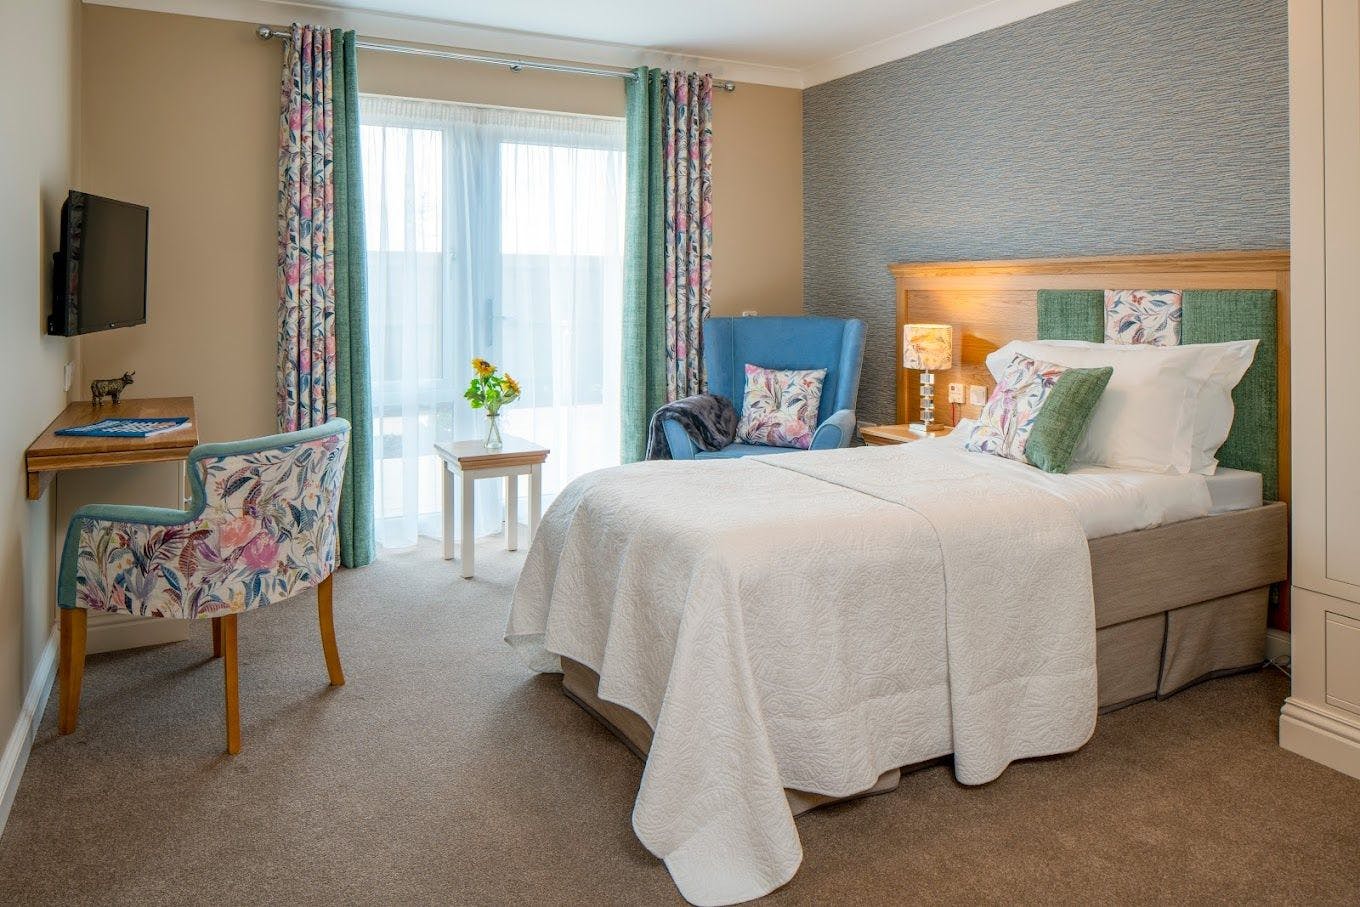 Bedroom at Cavell Park Care Home in Maidstone, Kent